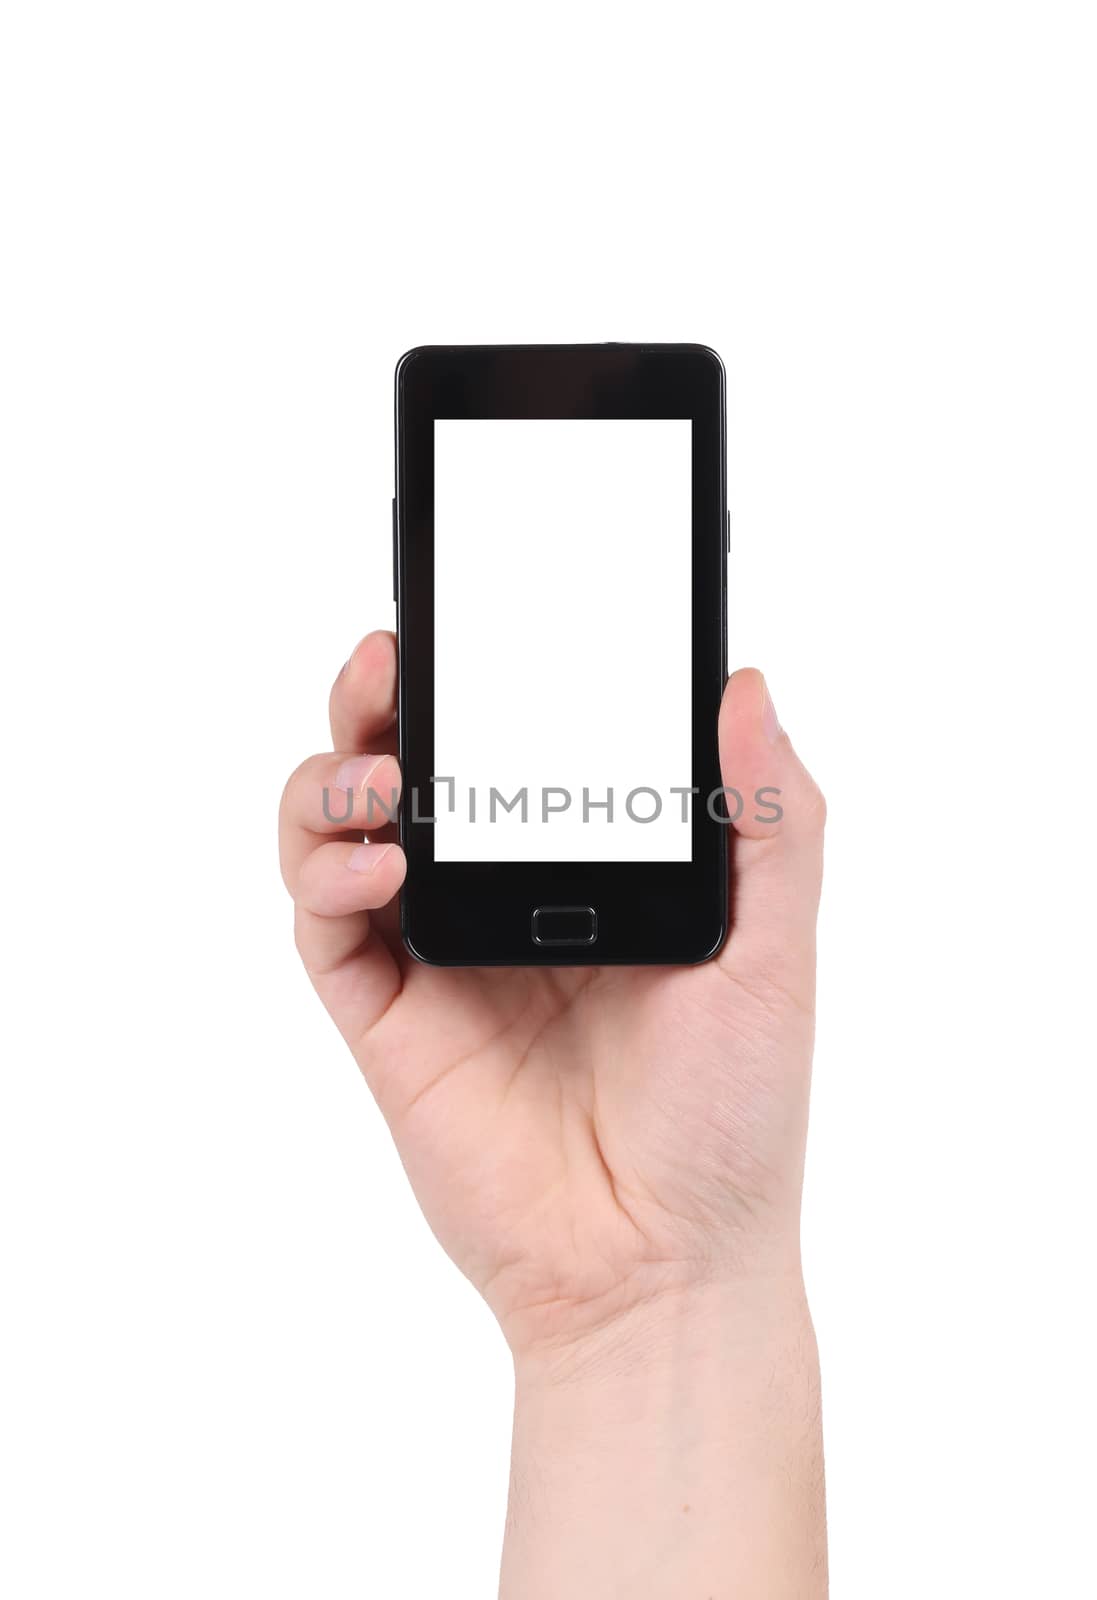 Cell phone in man's hand. Isolated on a white background.